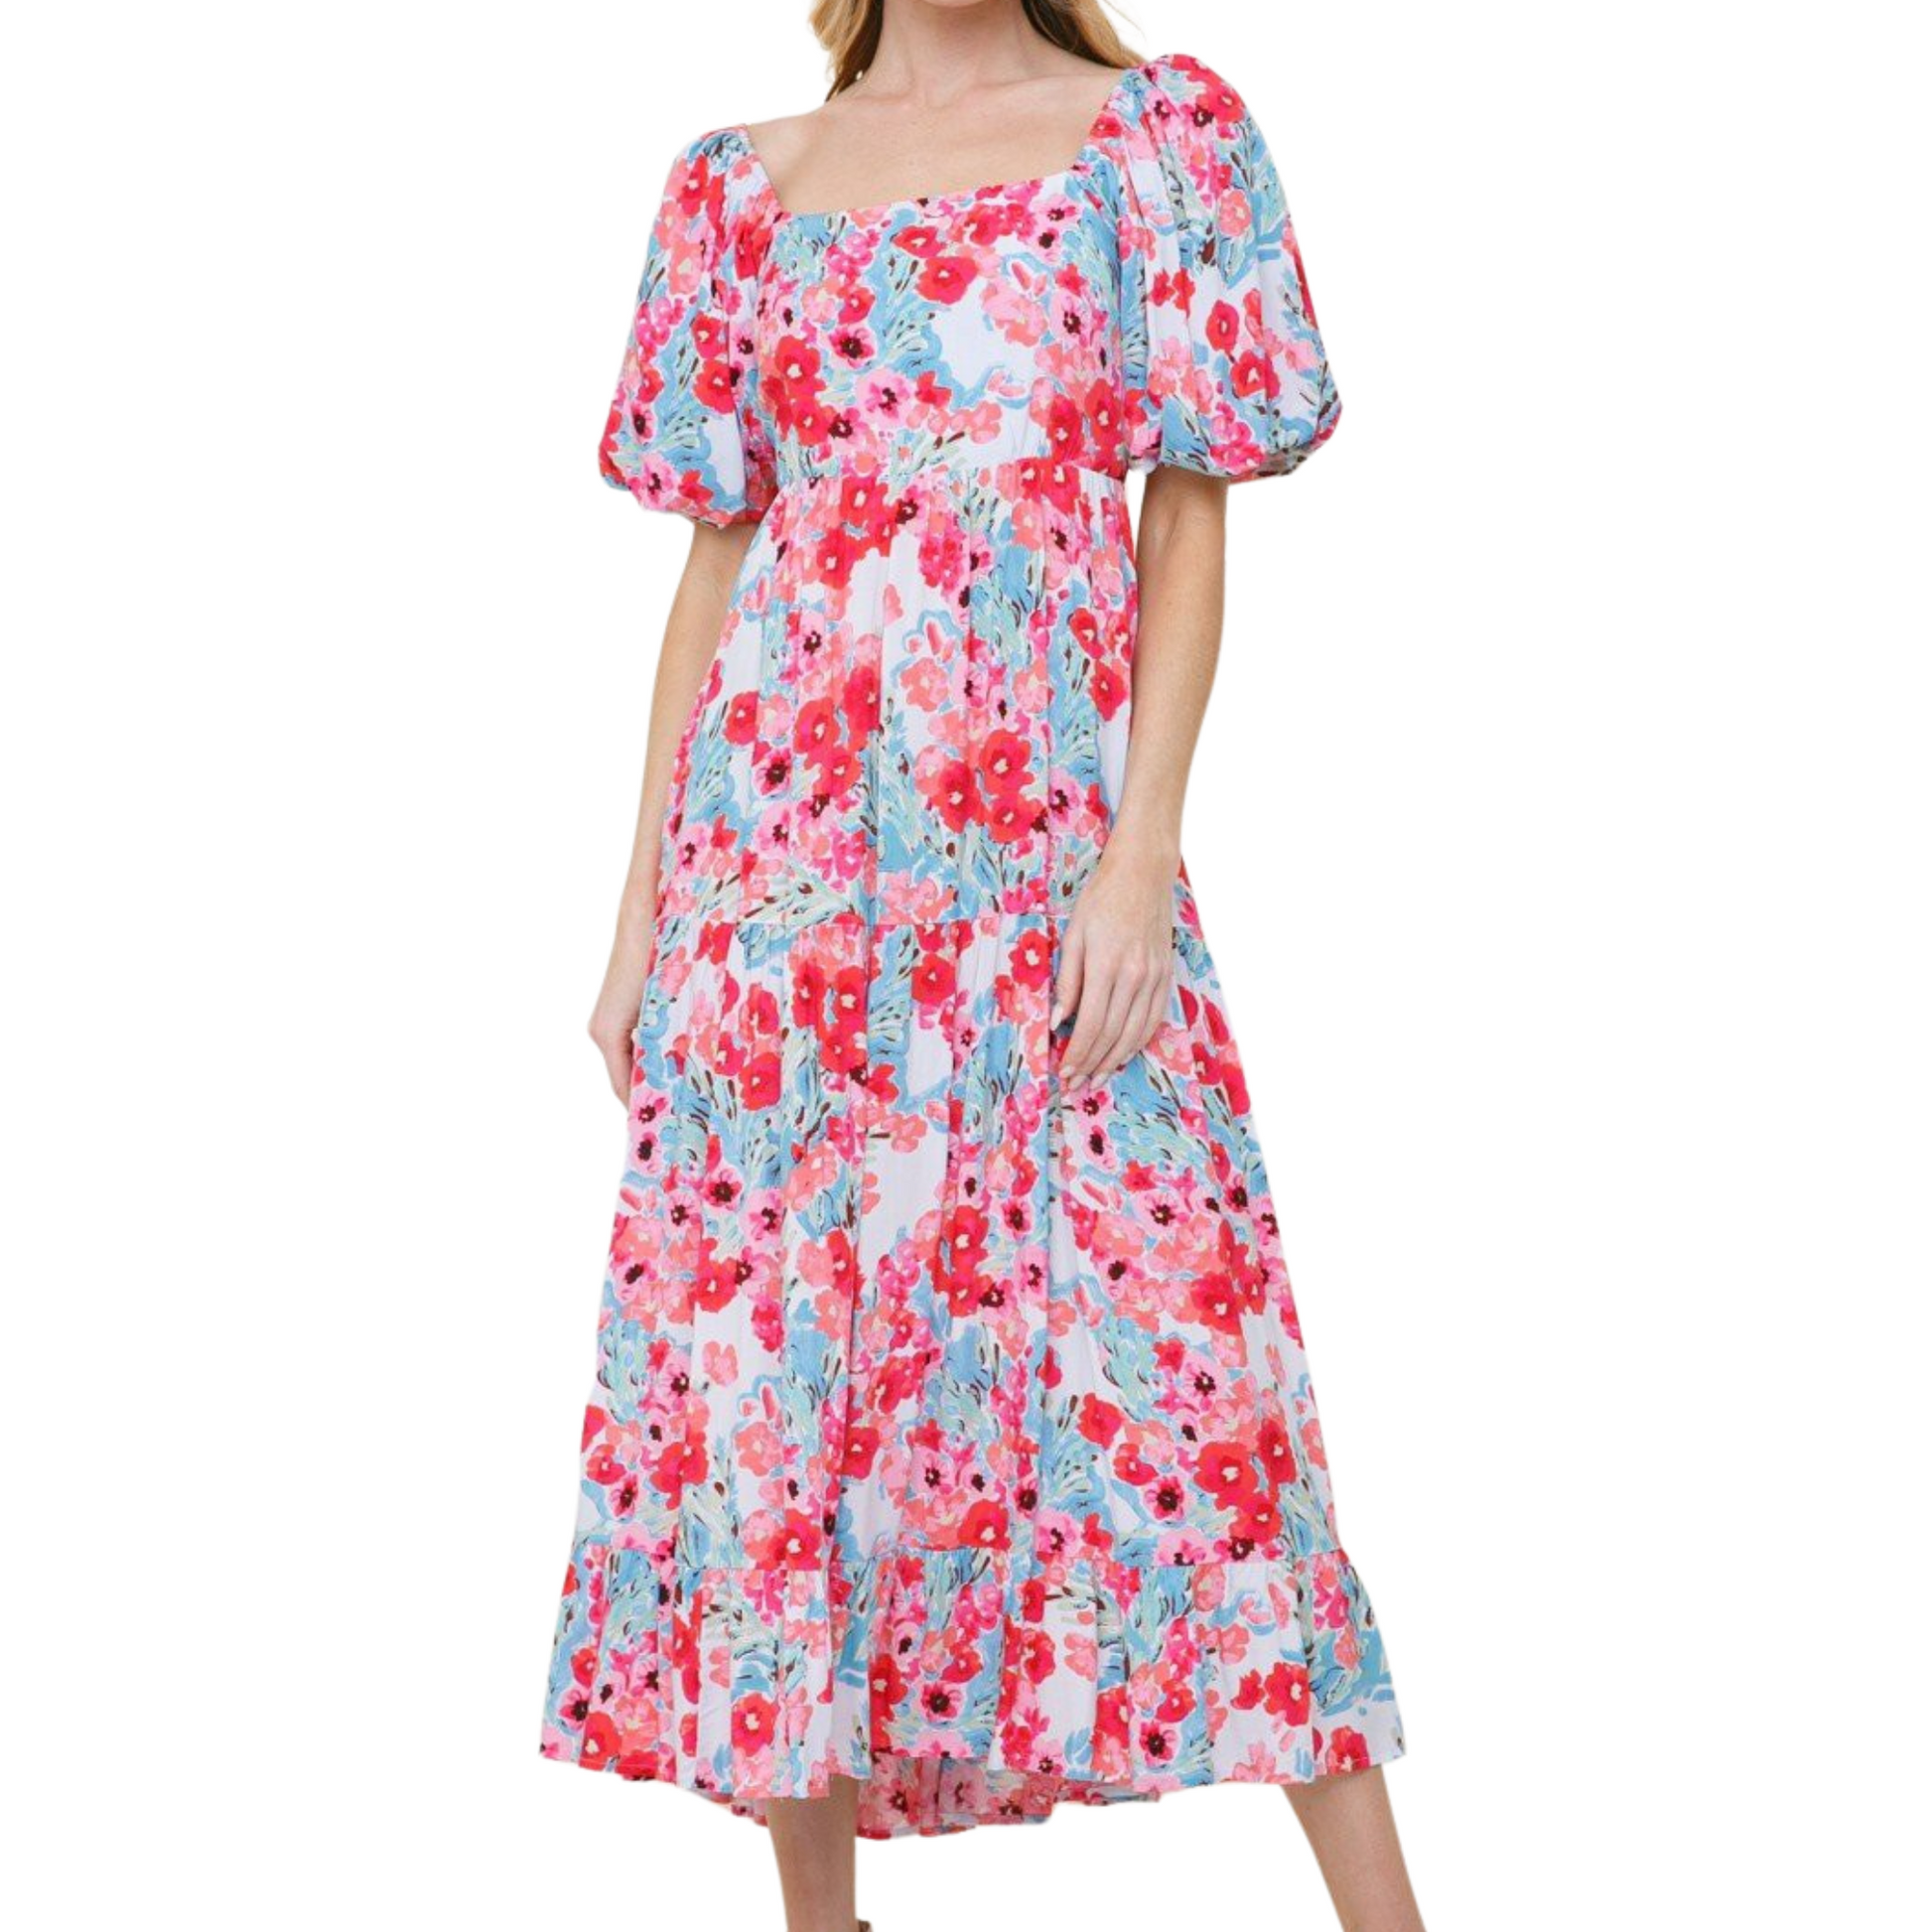 Pink, blue and white floral midi dress with square neckline and tie back, worn by a woman from the front.